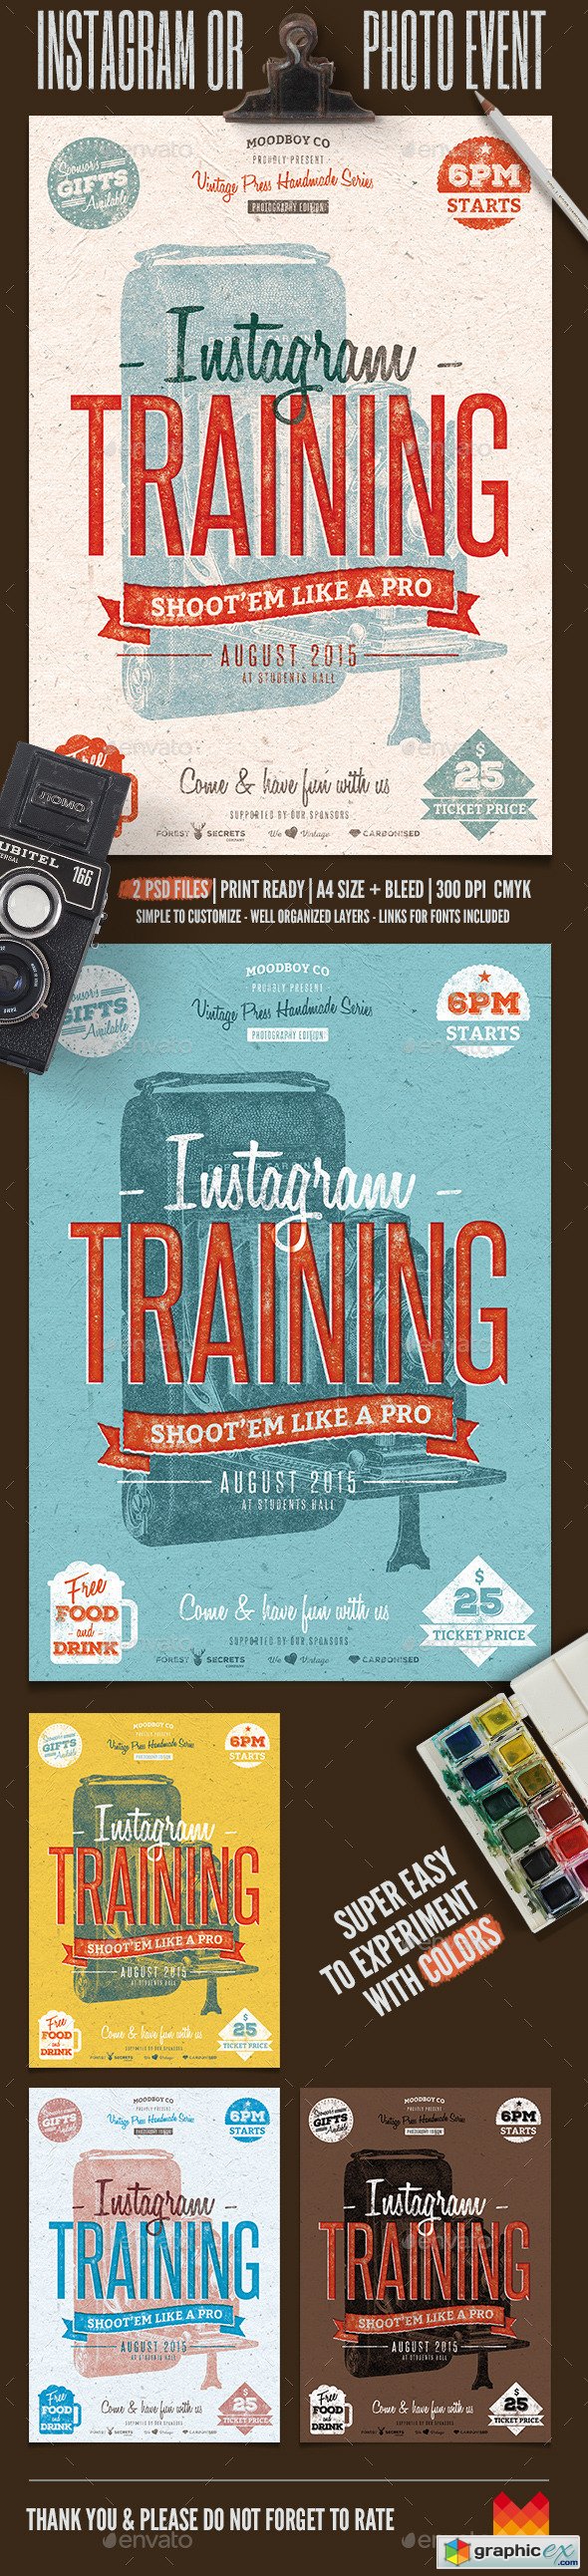 Instagram Photography Event Flyer/Poster